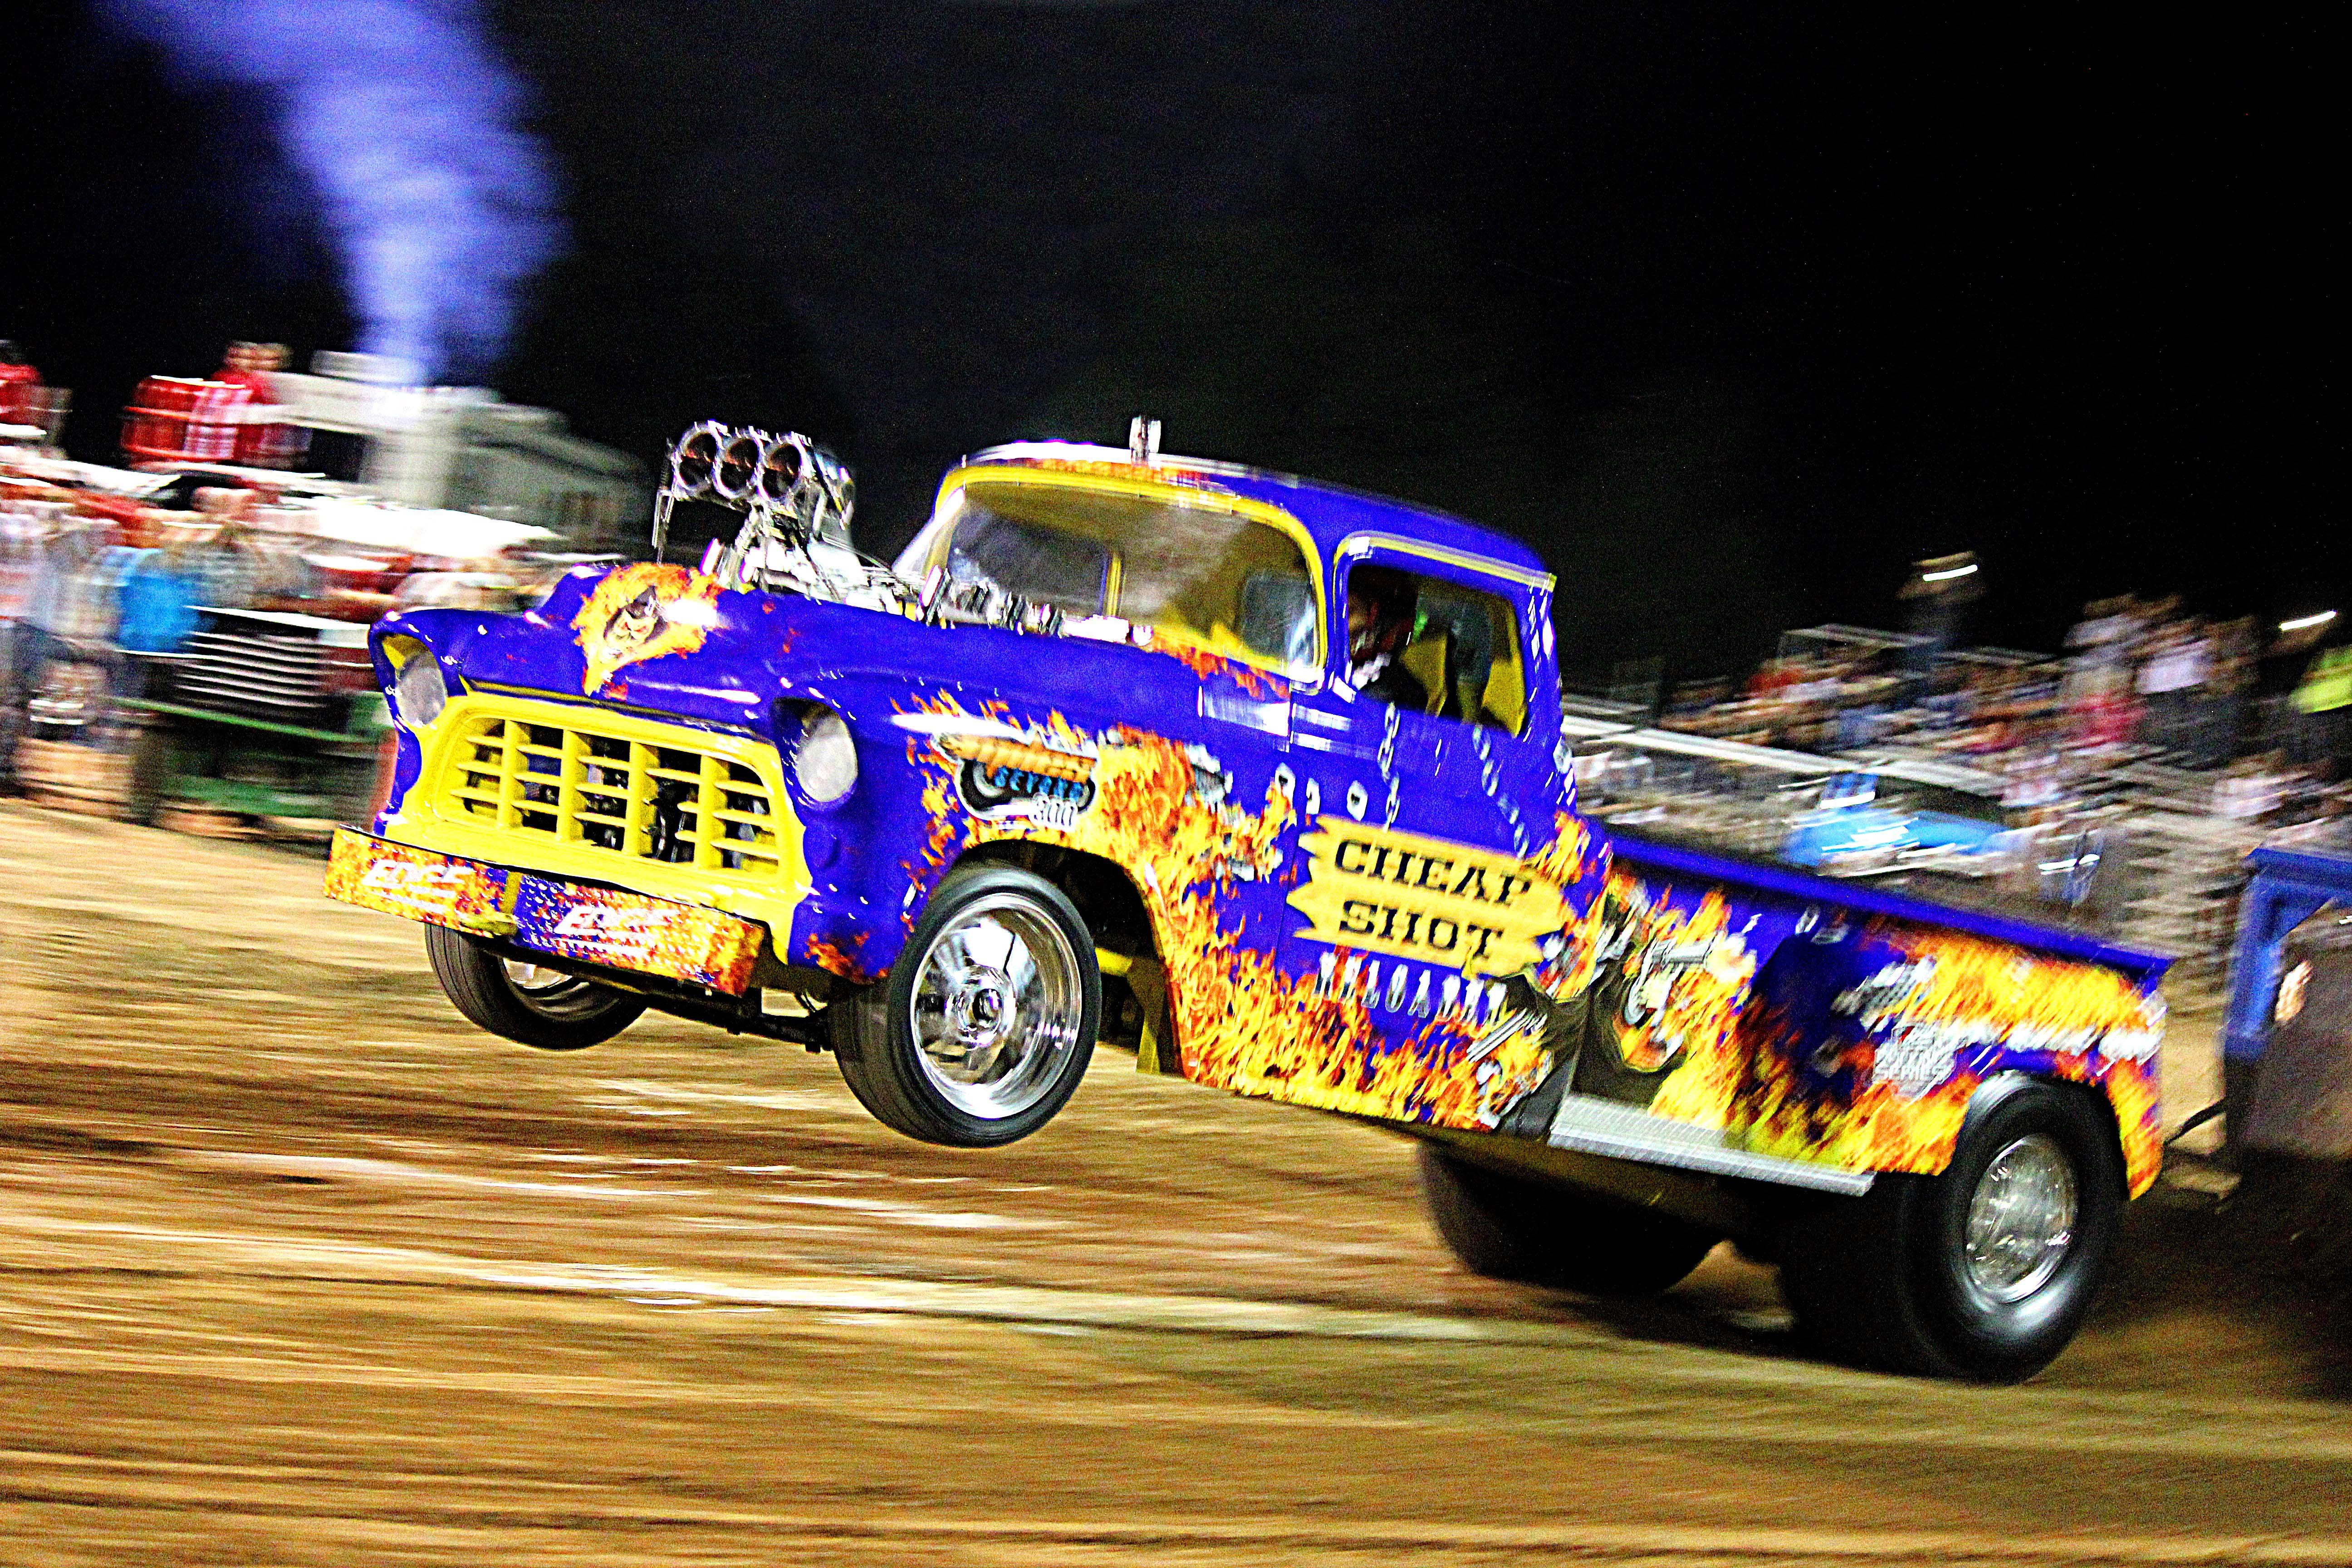 tractor pulling, Race, Racing, Hot, Rod, Rods, Tractor, Pickup Wallpaper